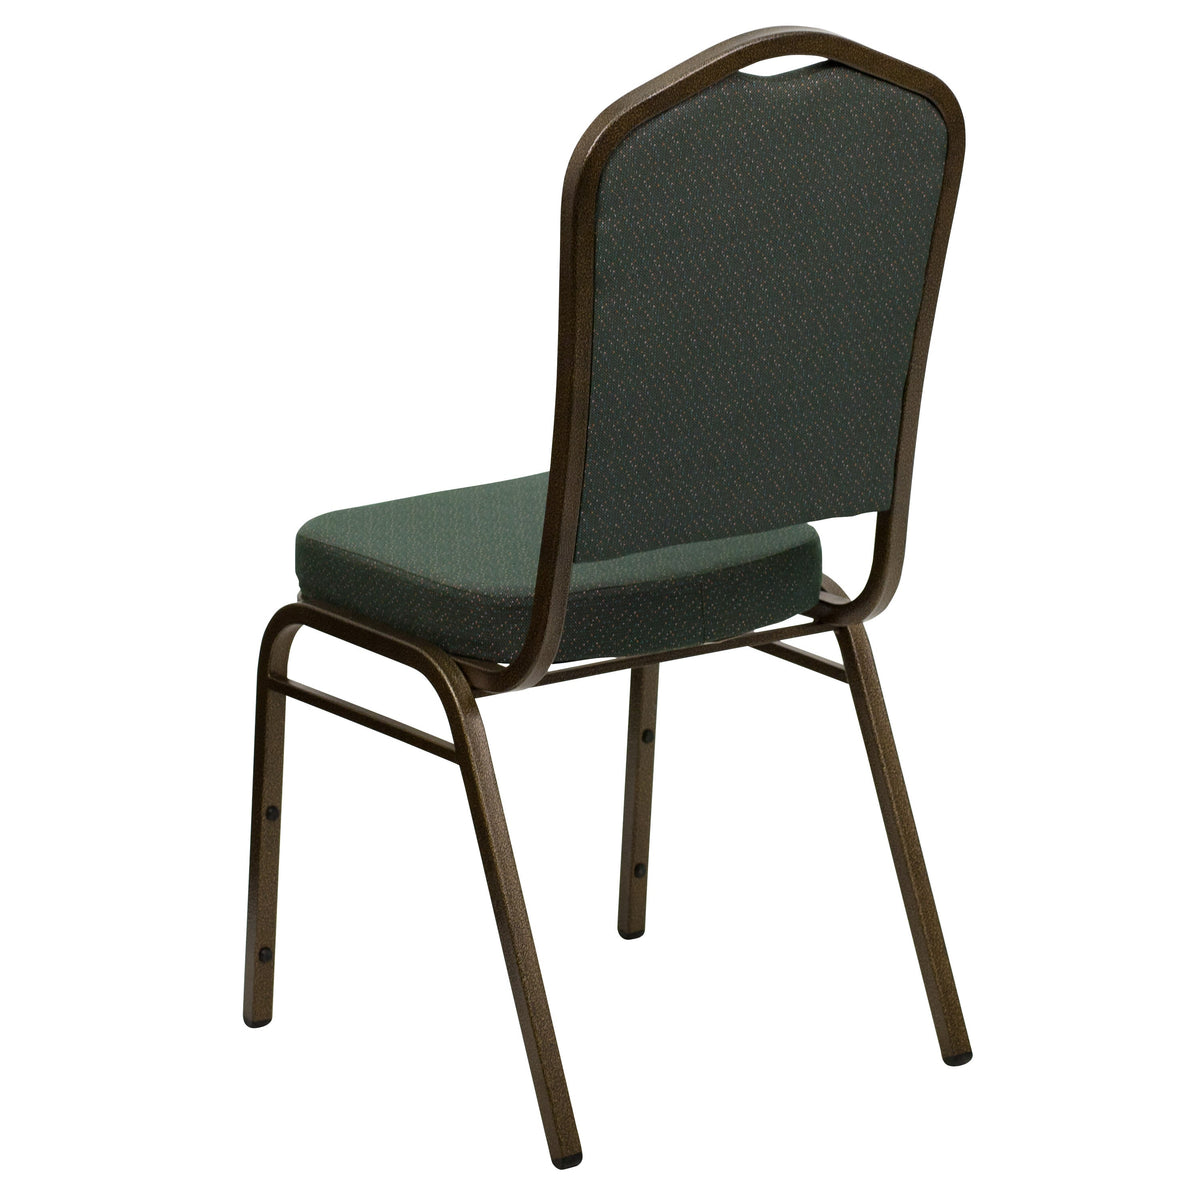 Green Patterned Fabric/Gold Vein Frame |#| Crown Back Stacking Banquet Chair in Green Patterned Fabric - Gold Vein Frame